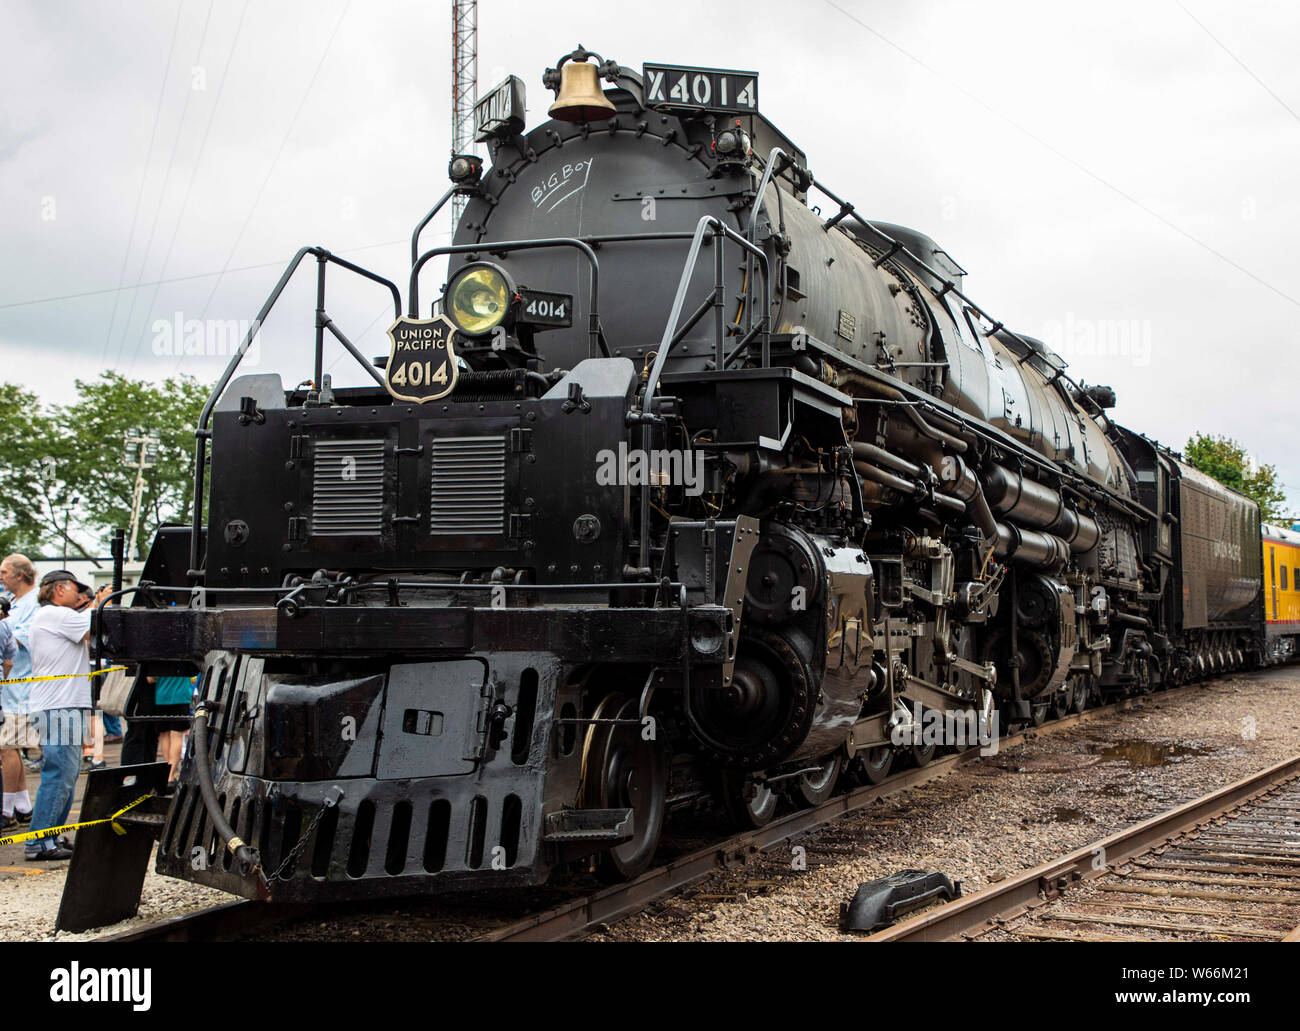 (190731) -- CHICAGO, July 31, 2019 (Xinhua) -- The historic Big Boy No. 4014 steam locomotive stops in West Chicago, Illinois, the United States, on July 29, 2019. The Big Boy No. 4014 steam locomotive spent three days in West Chicago during a tour to commemorate the 150th anniversary of the completion of the transcontinental railroad. (Photo by Joel Lerner/Xinhua) Stock Photo